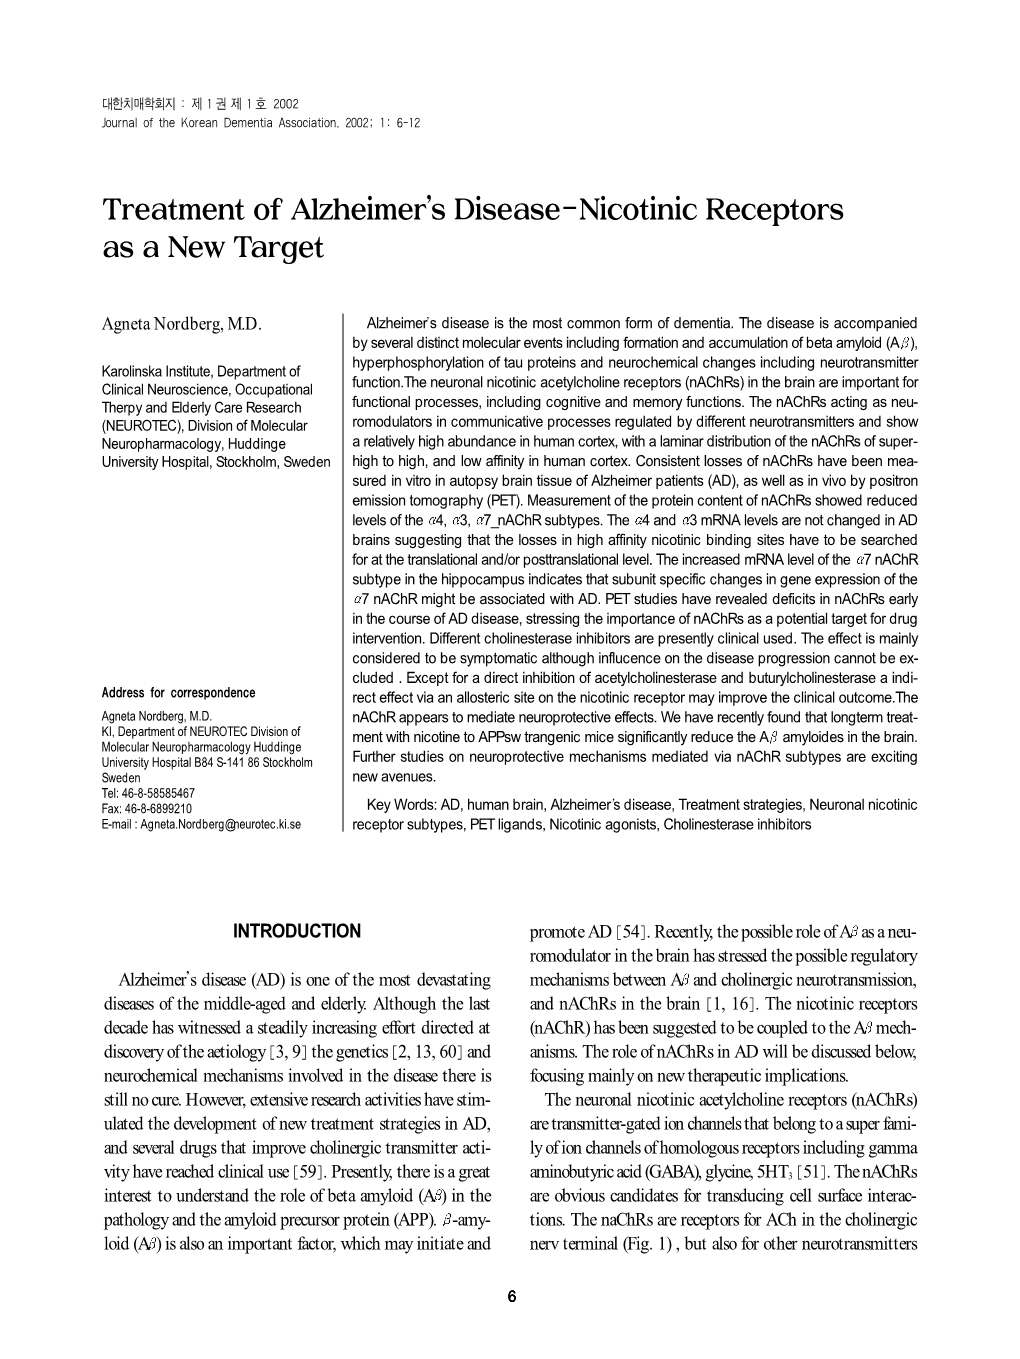 Treatment of Alzheimer's Disease-Nicotinic Receptors As a New Target